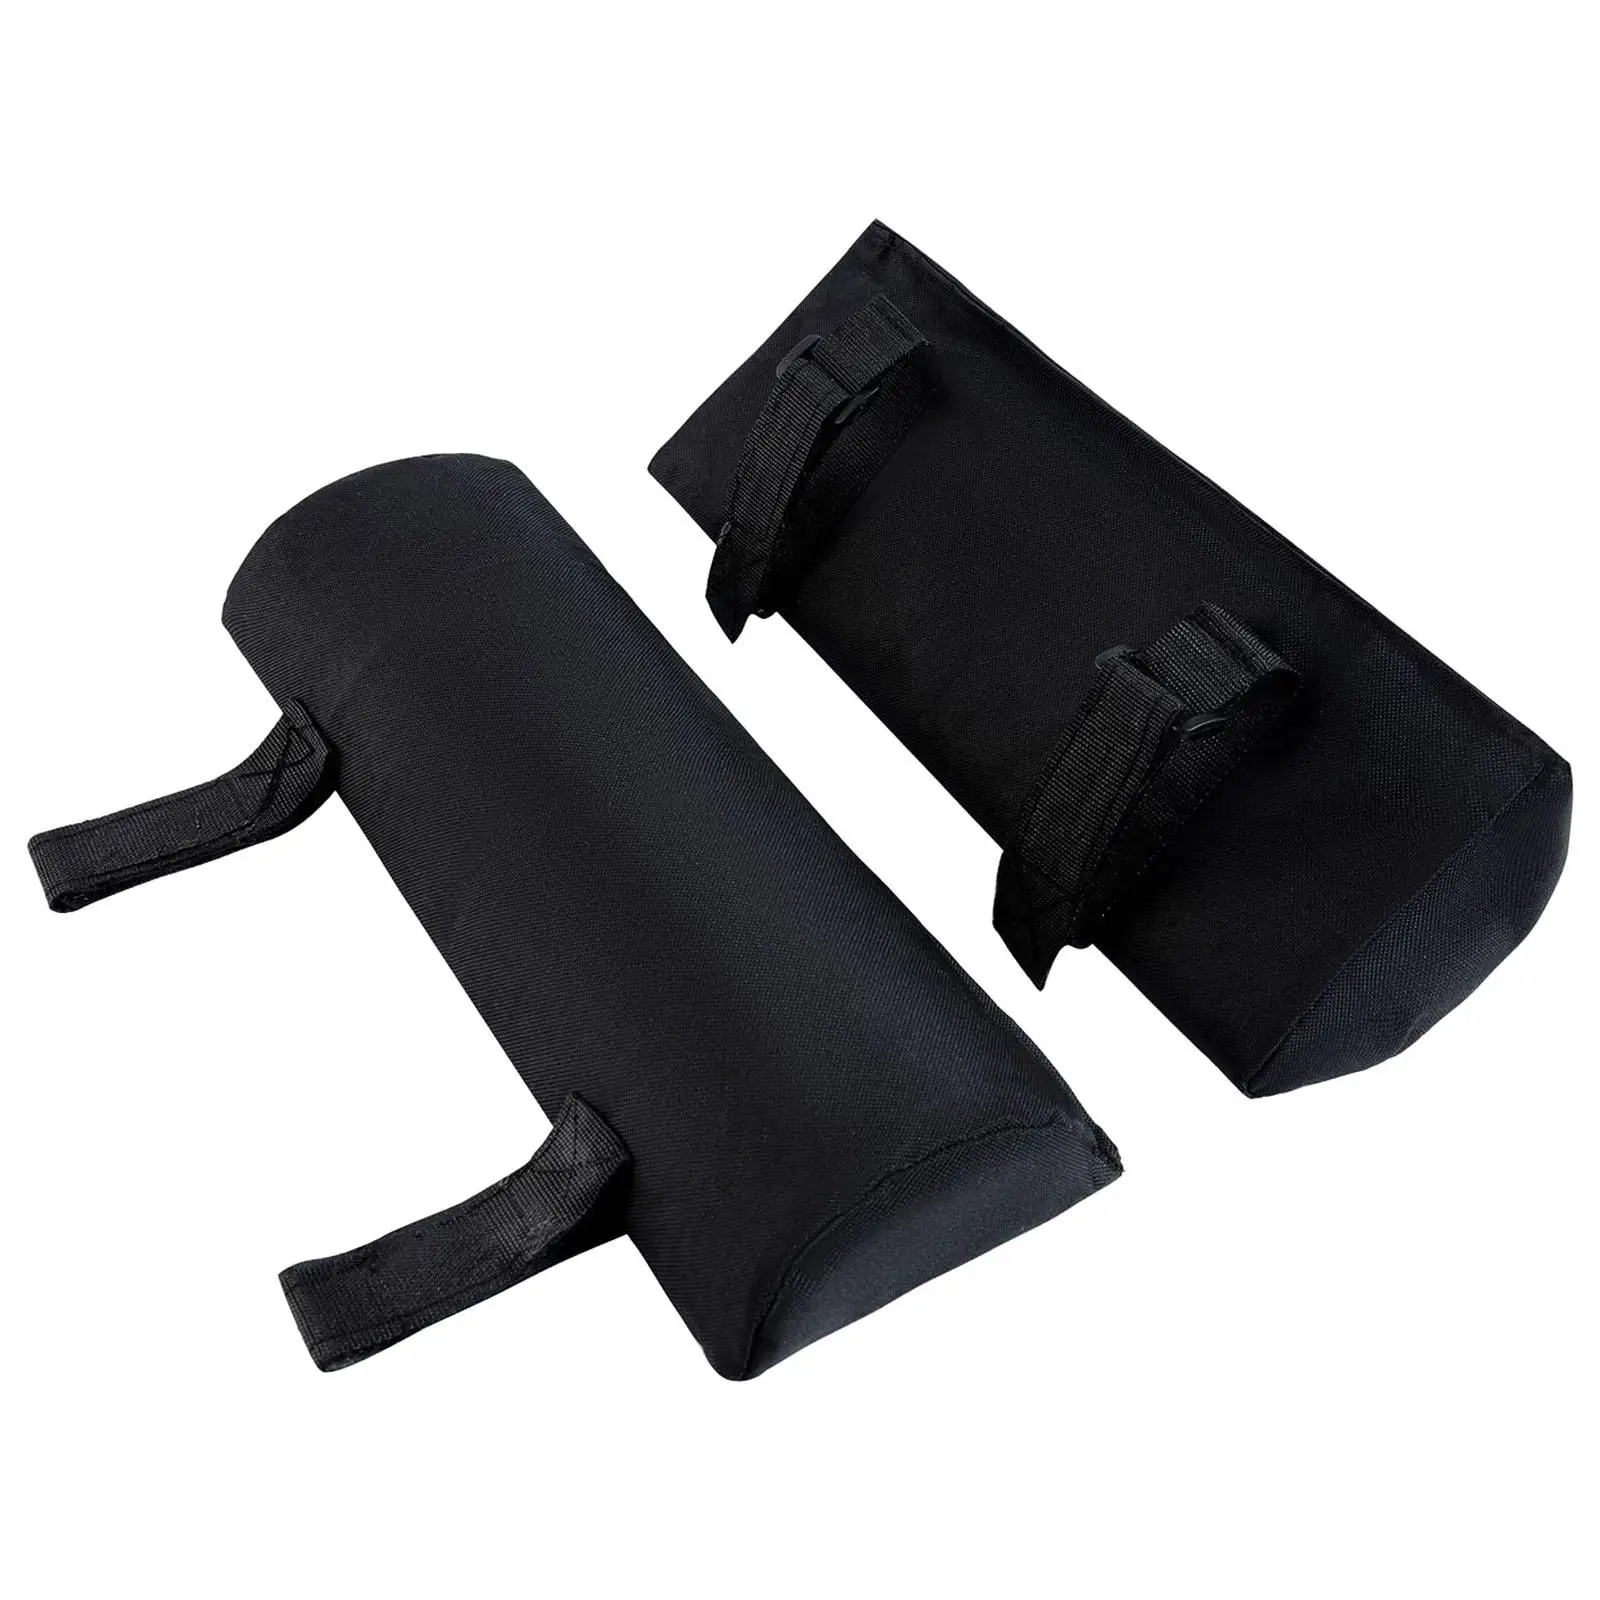 Folding recliner Cushion Armrest Padding Durable Material Black Accessories